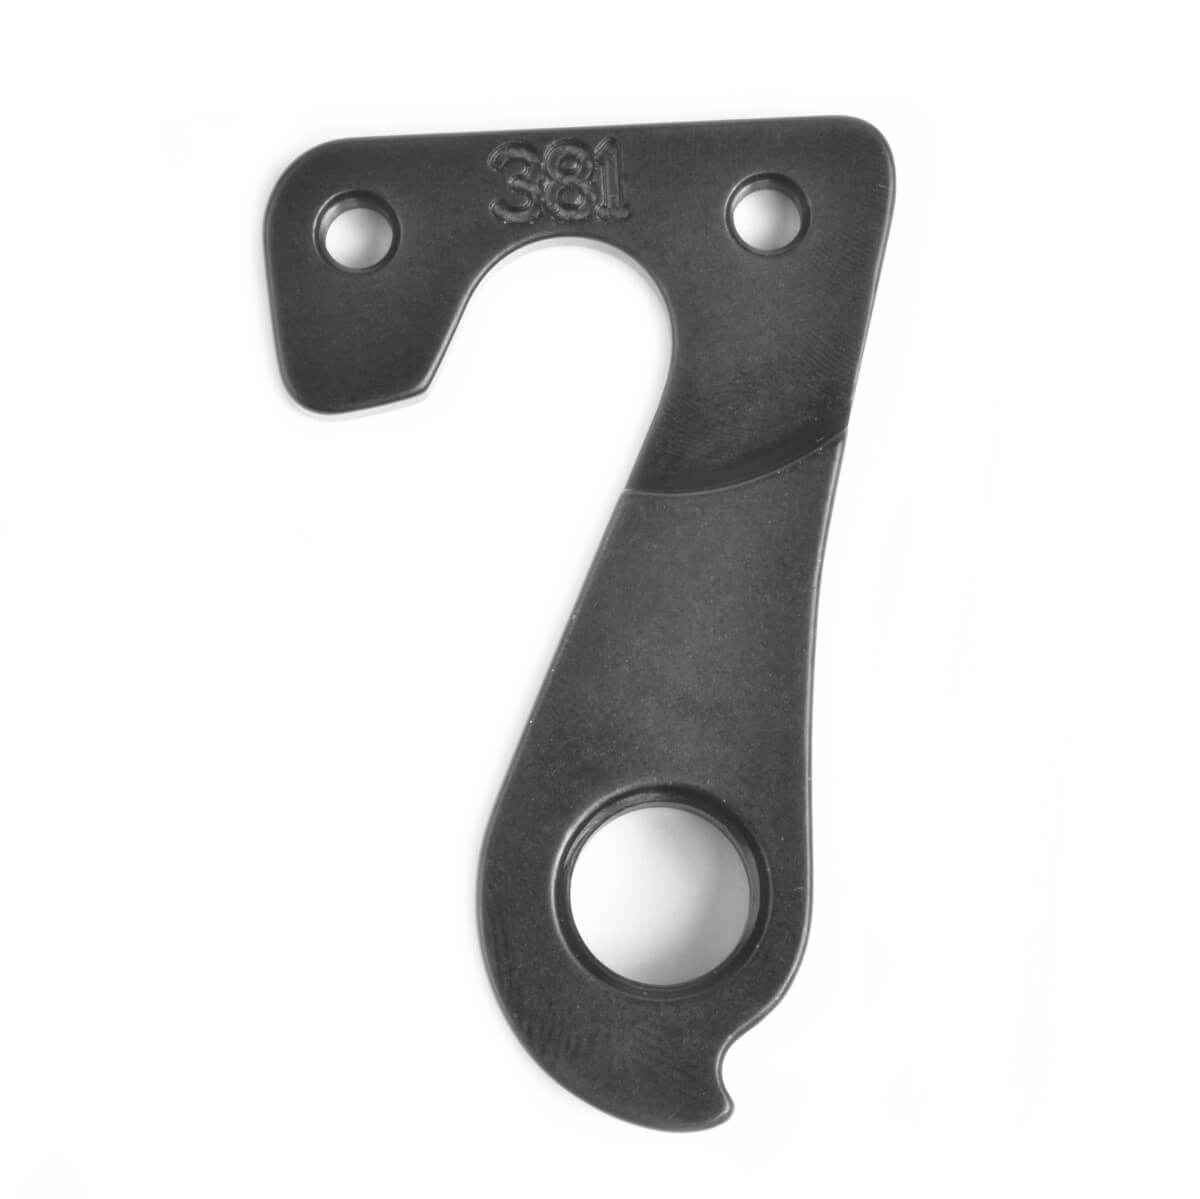 DROPOUT-381 Derailleur Hanger for CEEPO Mamba Stinger bicycles #Rd_No. 3 (Wheels mfg rear gear mech hanger dropout)